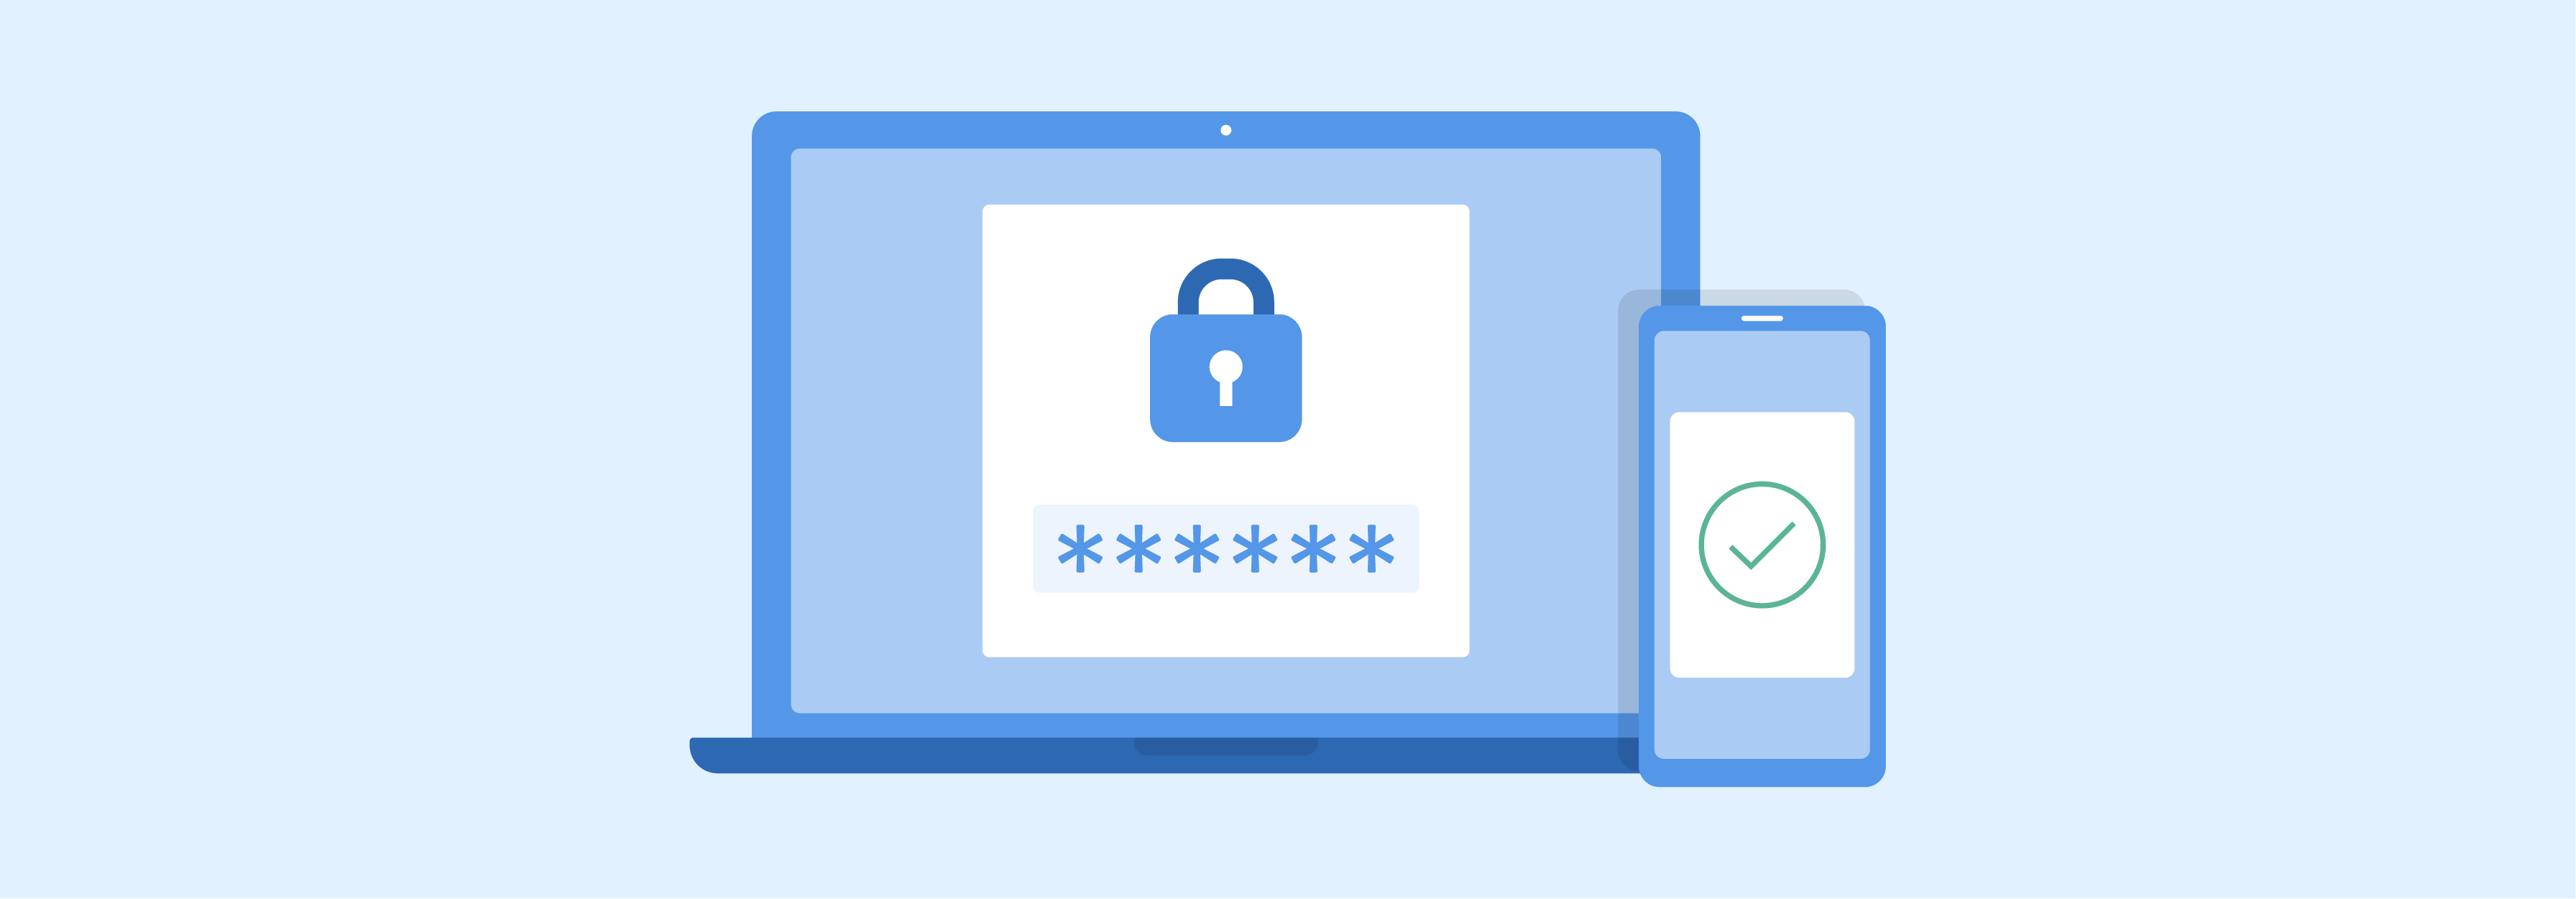 Two-factor authentication setup in Magento admin and SSH connections